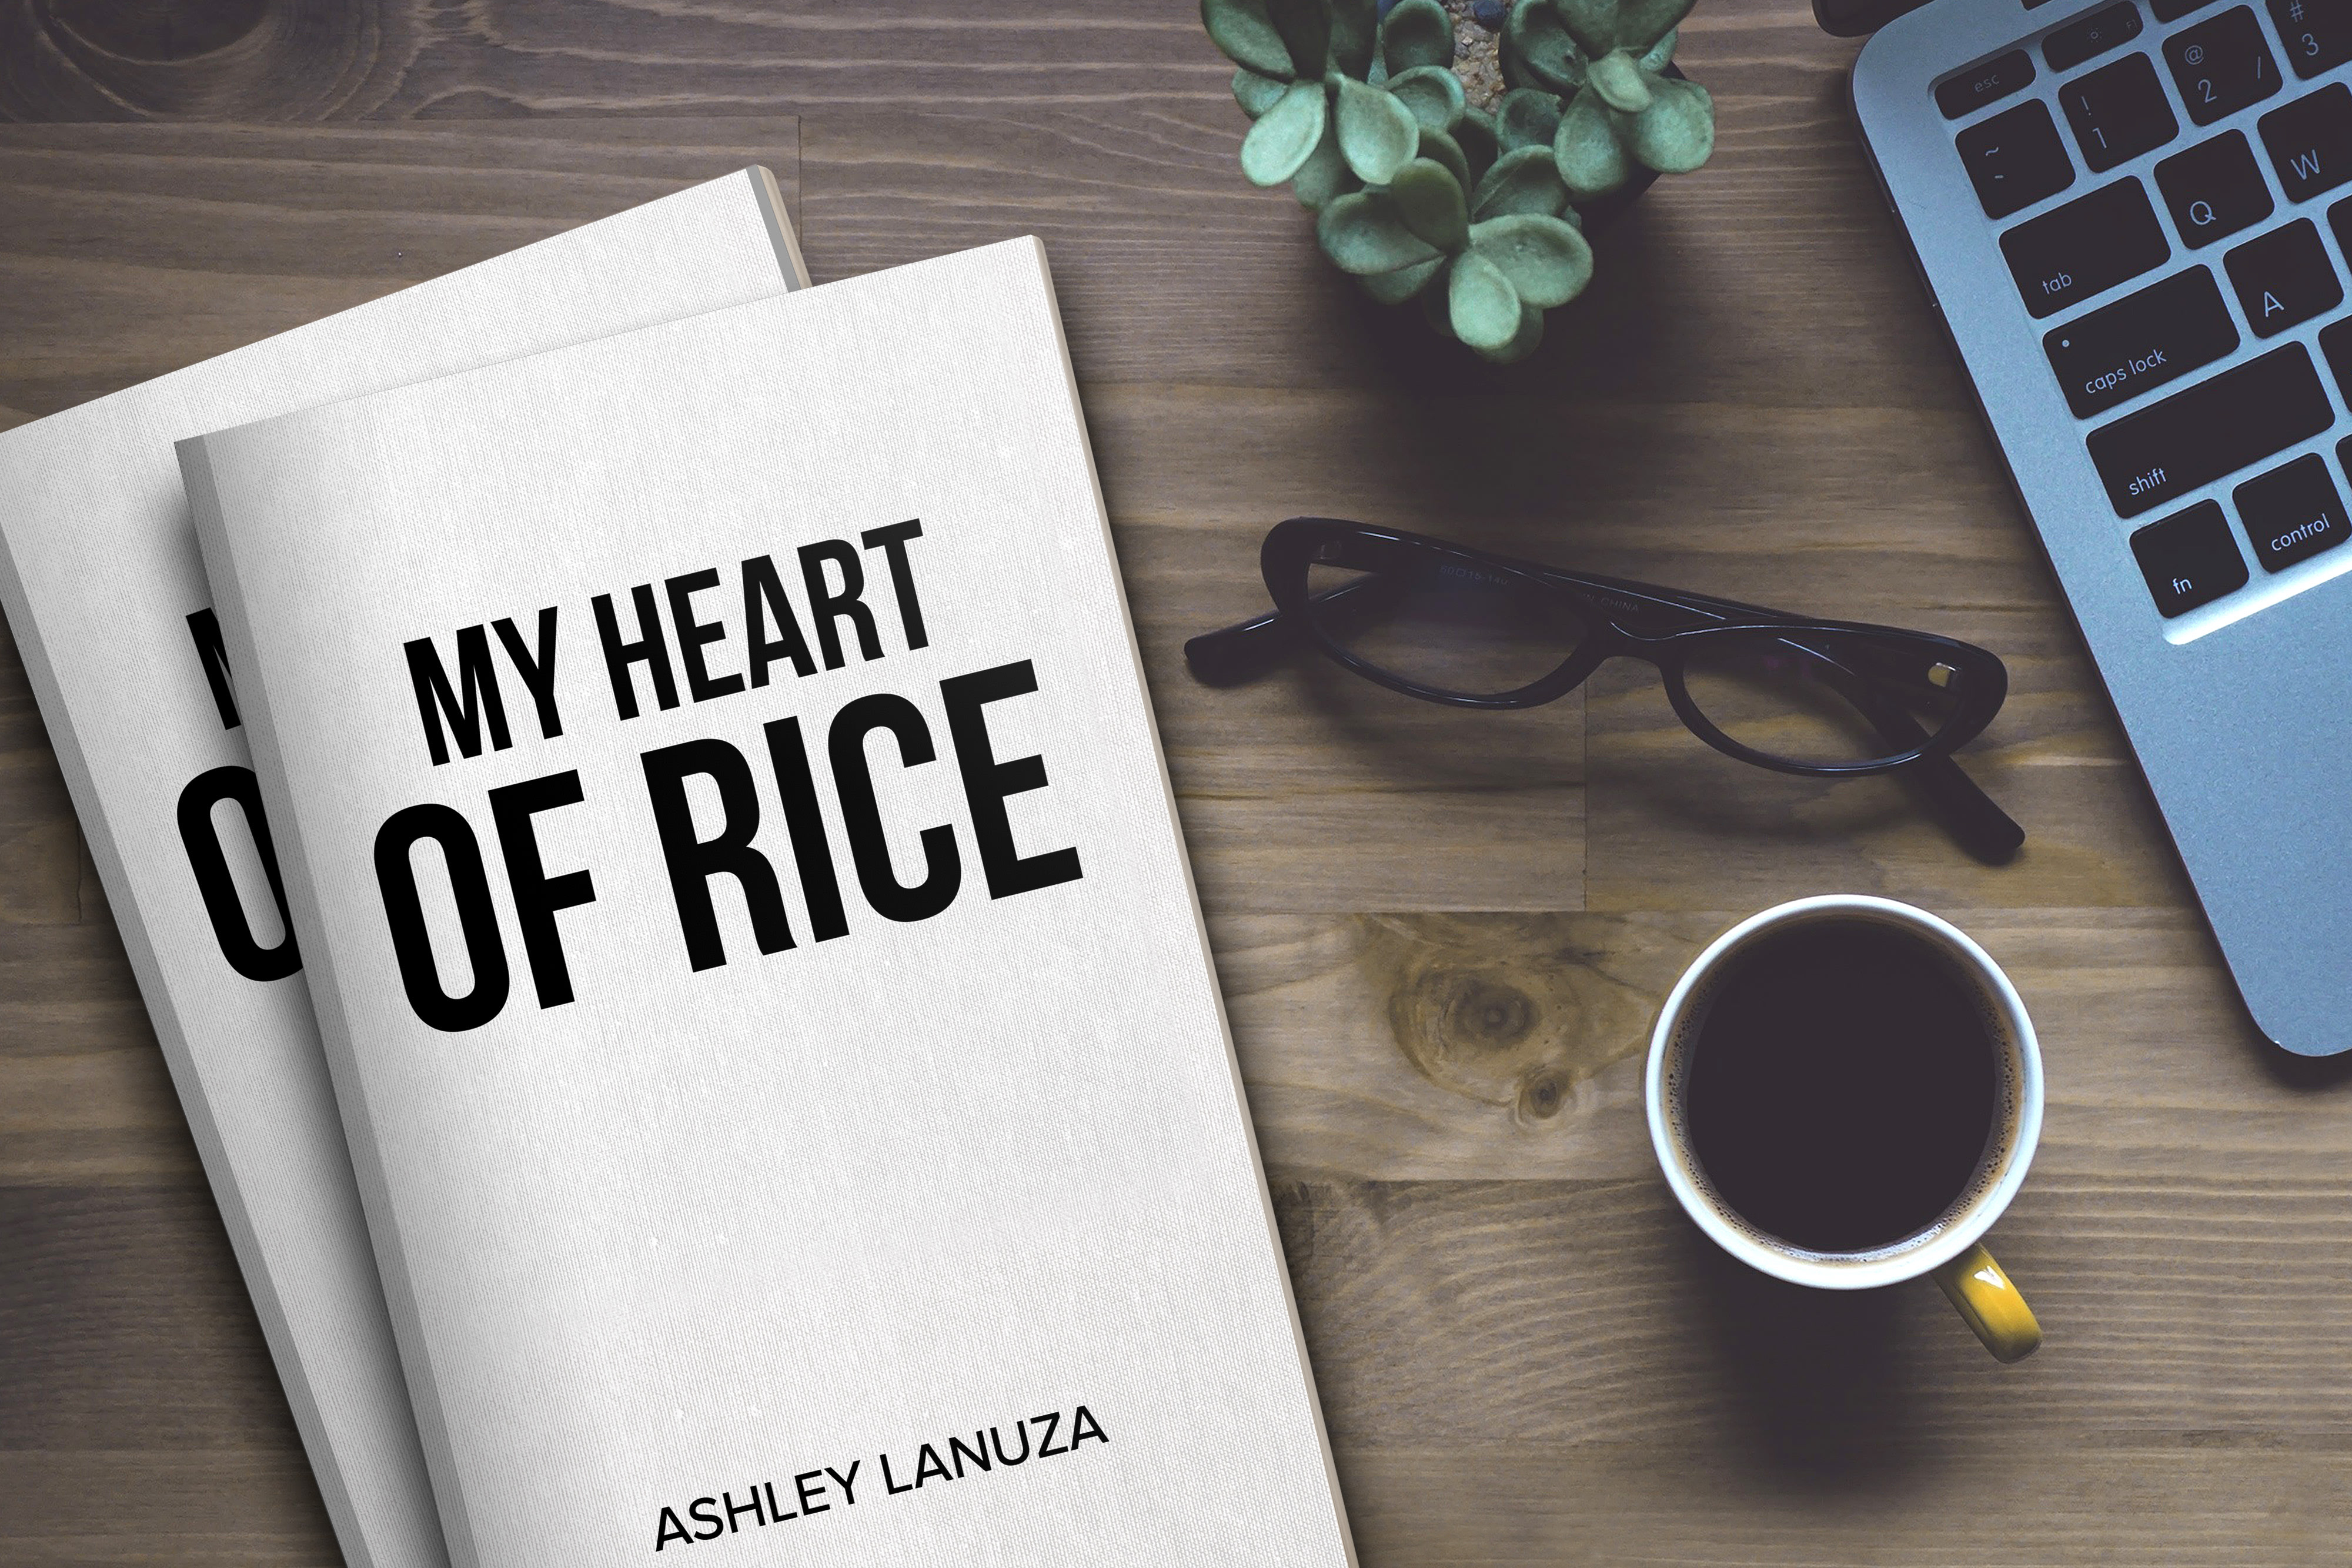 My Heart of Rice: A Poetic Filipino American Experience by Ashley